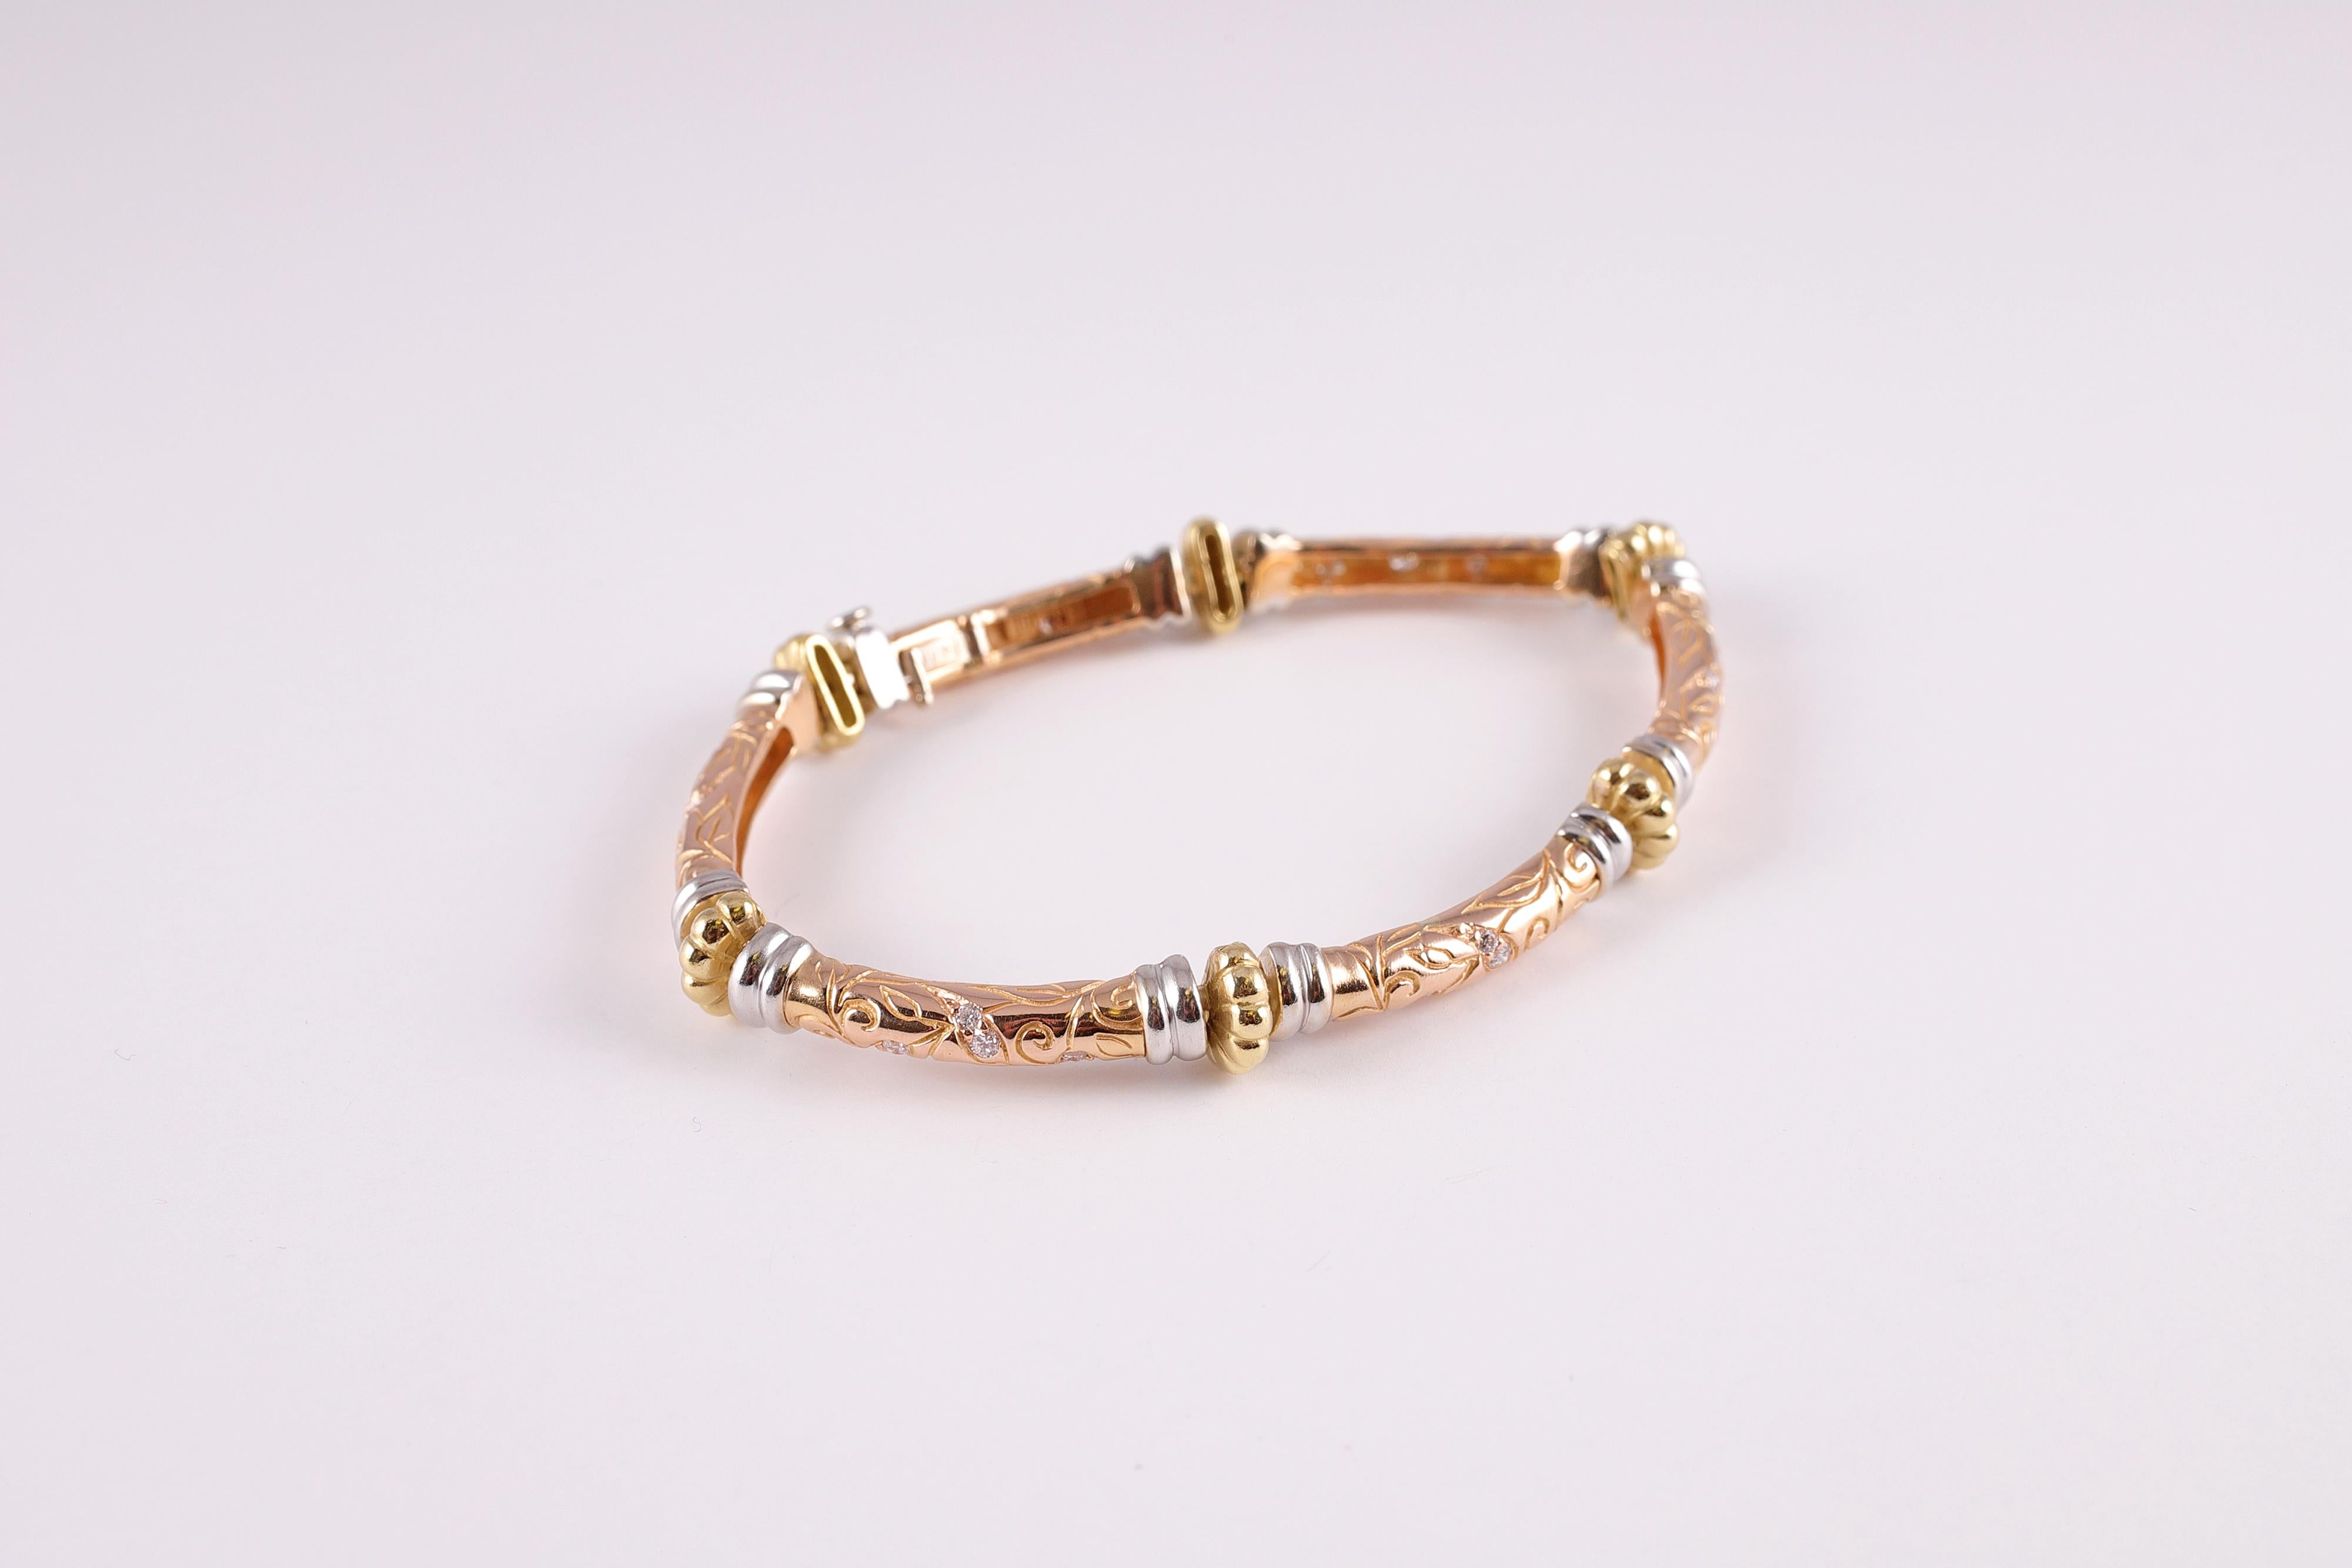 From the Laurel collection by SeidenGang, this yellow, white and rose gold bracelet measures approximately 8 inches in length and supports 0.63 carats of diamonds, VS in clarity and G - I in color. 